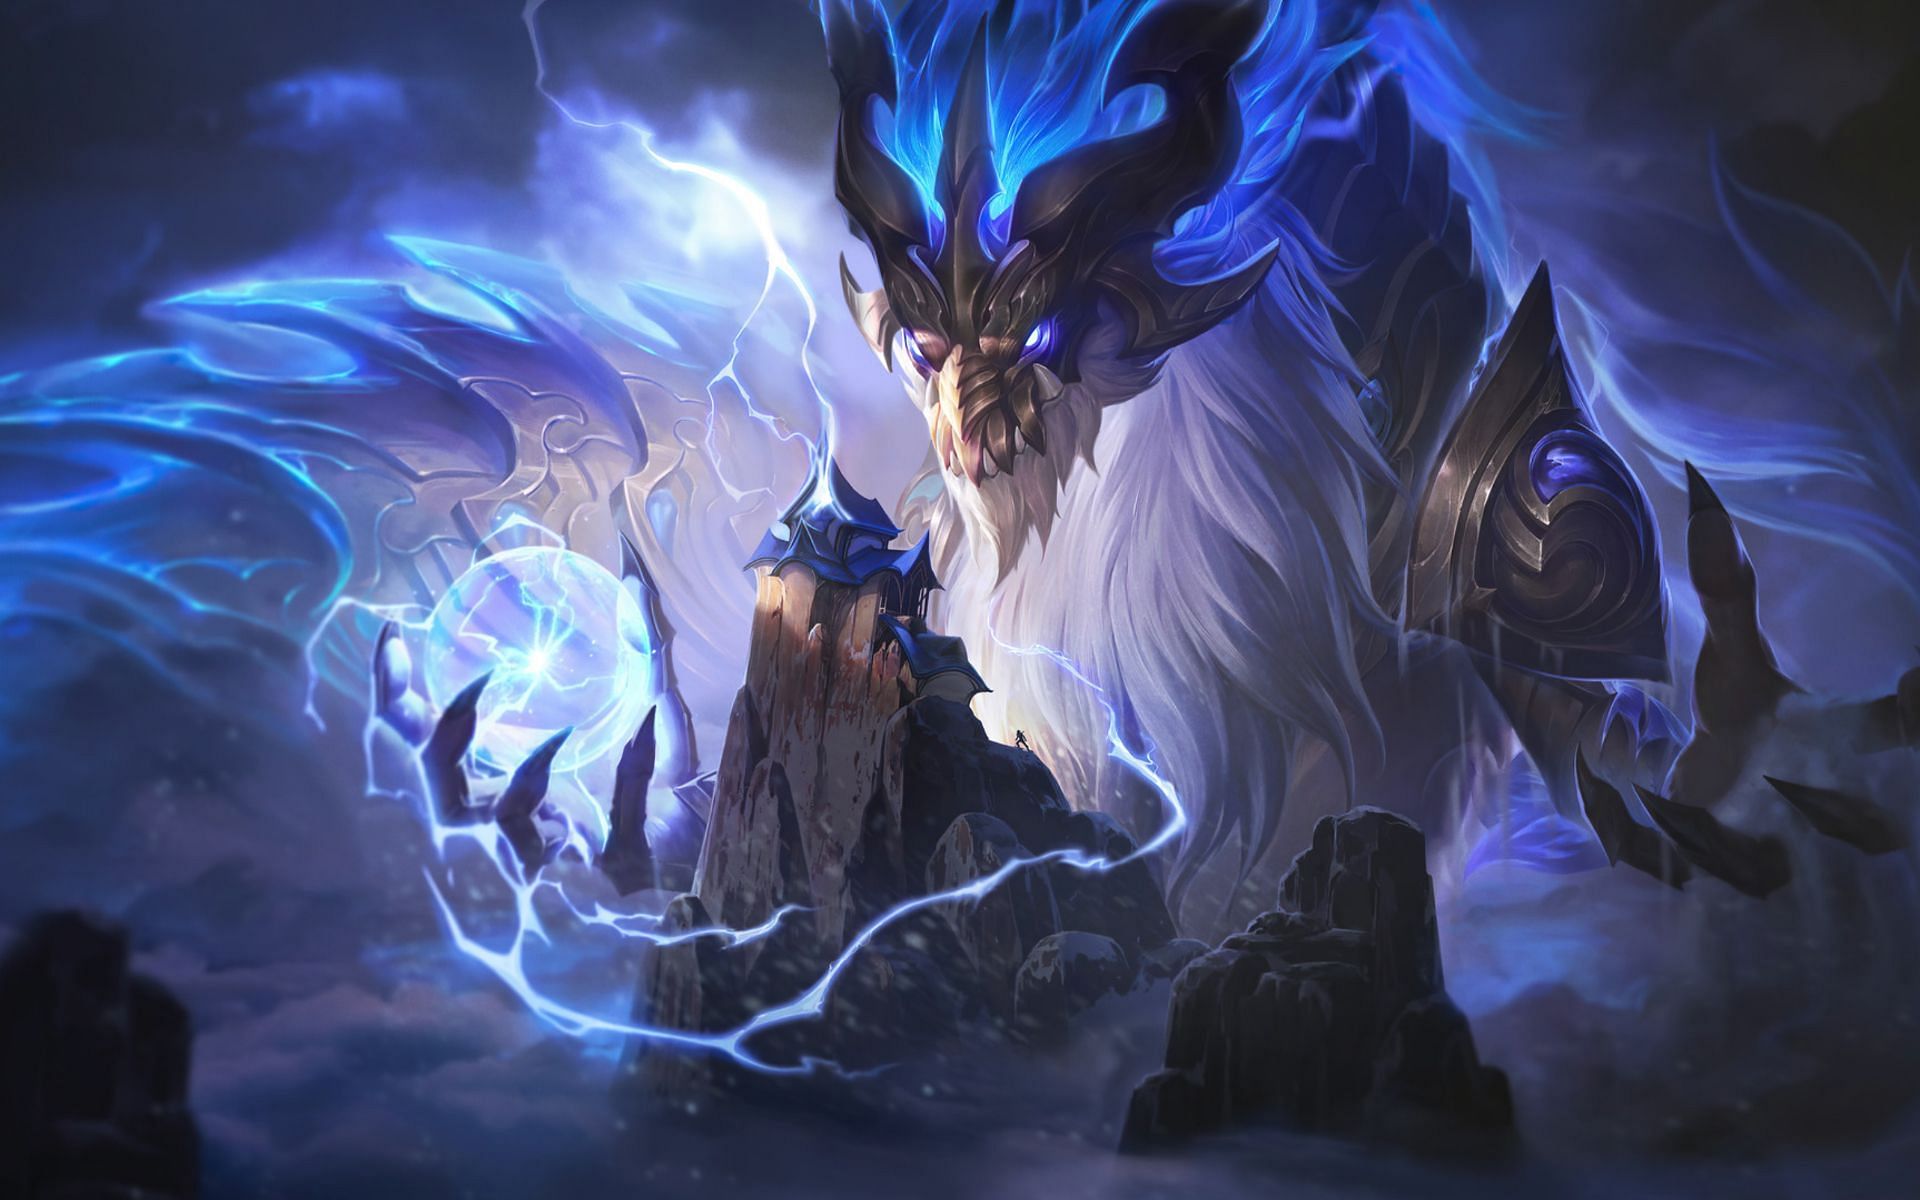 Aurelion Sol is still one of the best champions in the game (Image via Riot Games)